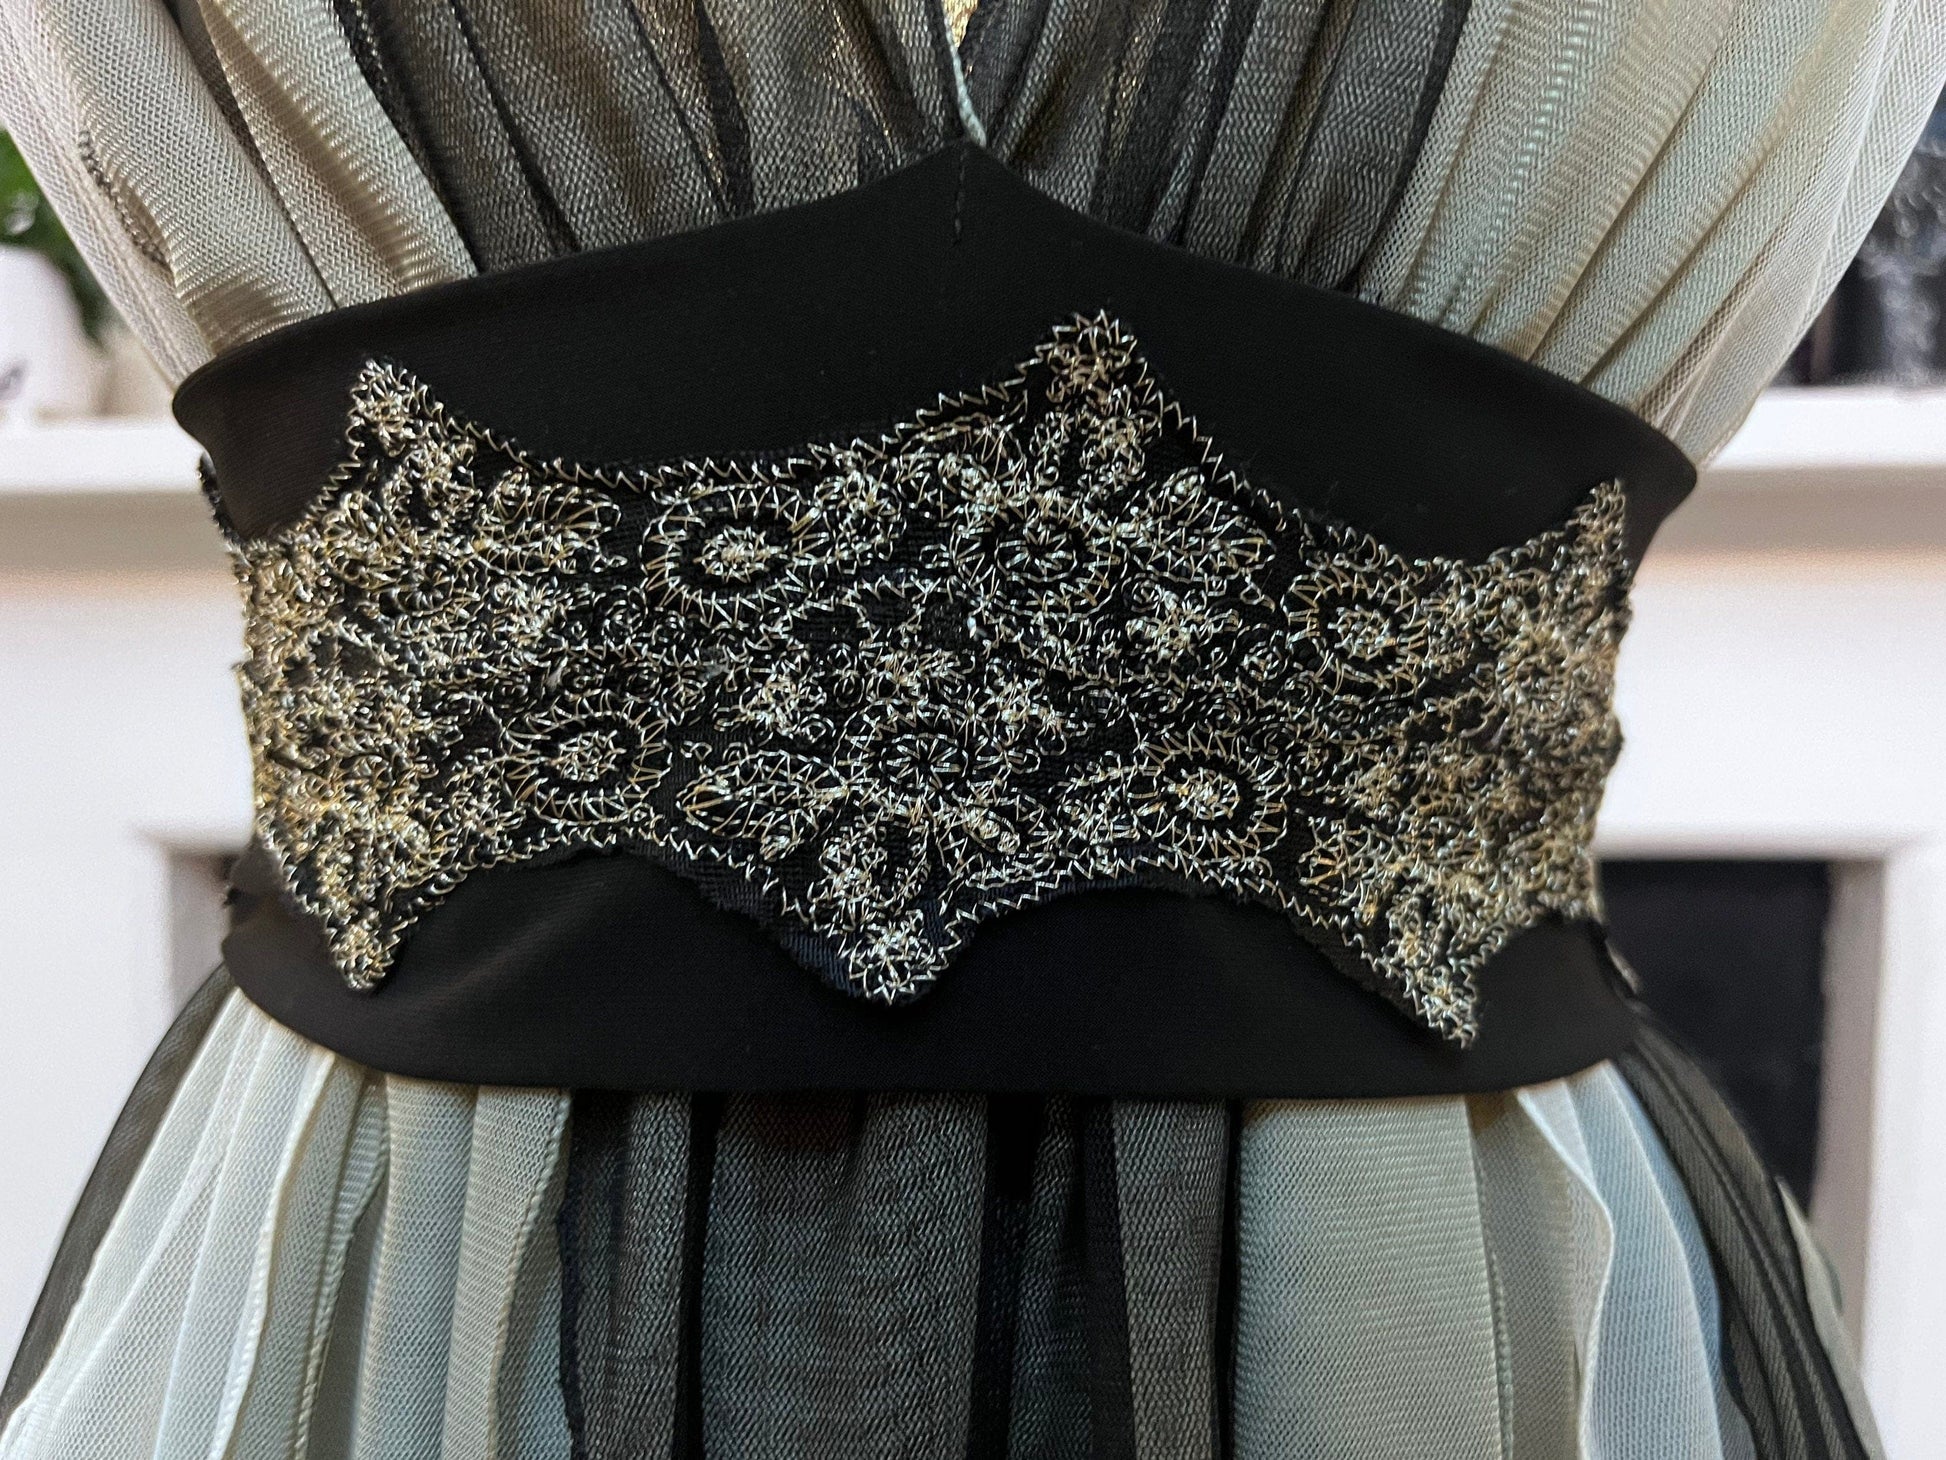 Vintage Greys & Black Deep V Party Evening Top Fine Mesh Multi Layered Fabrics with waistband detail - EUR38